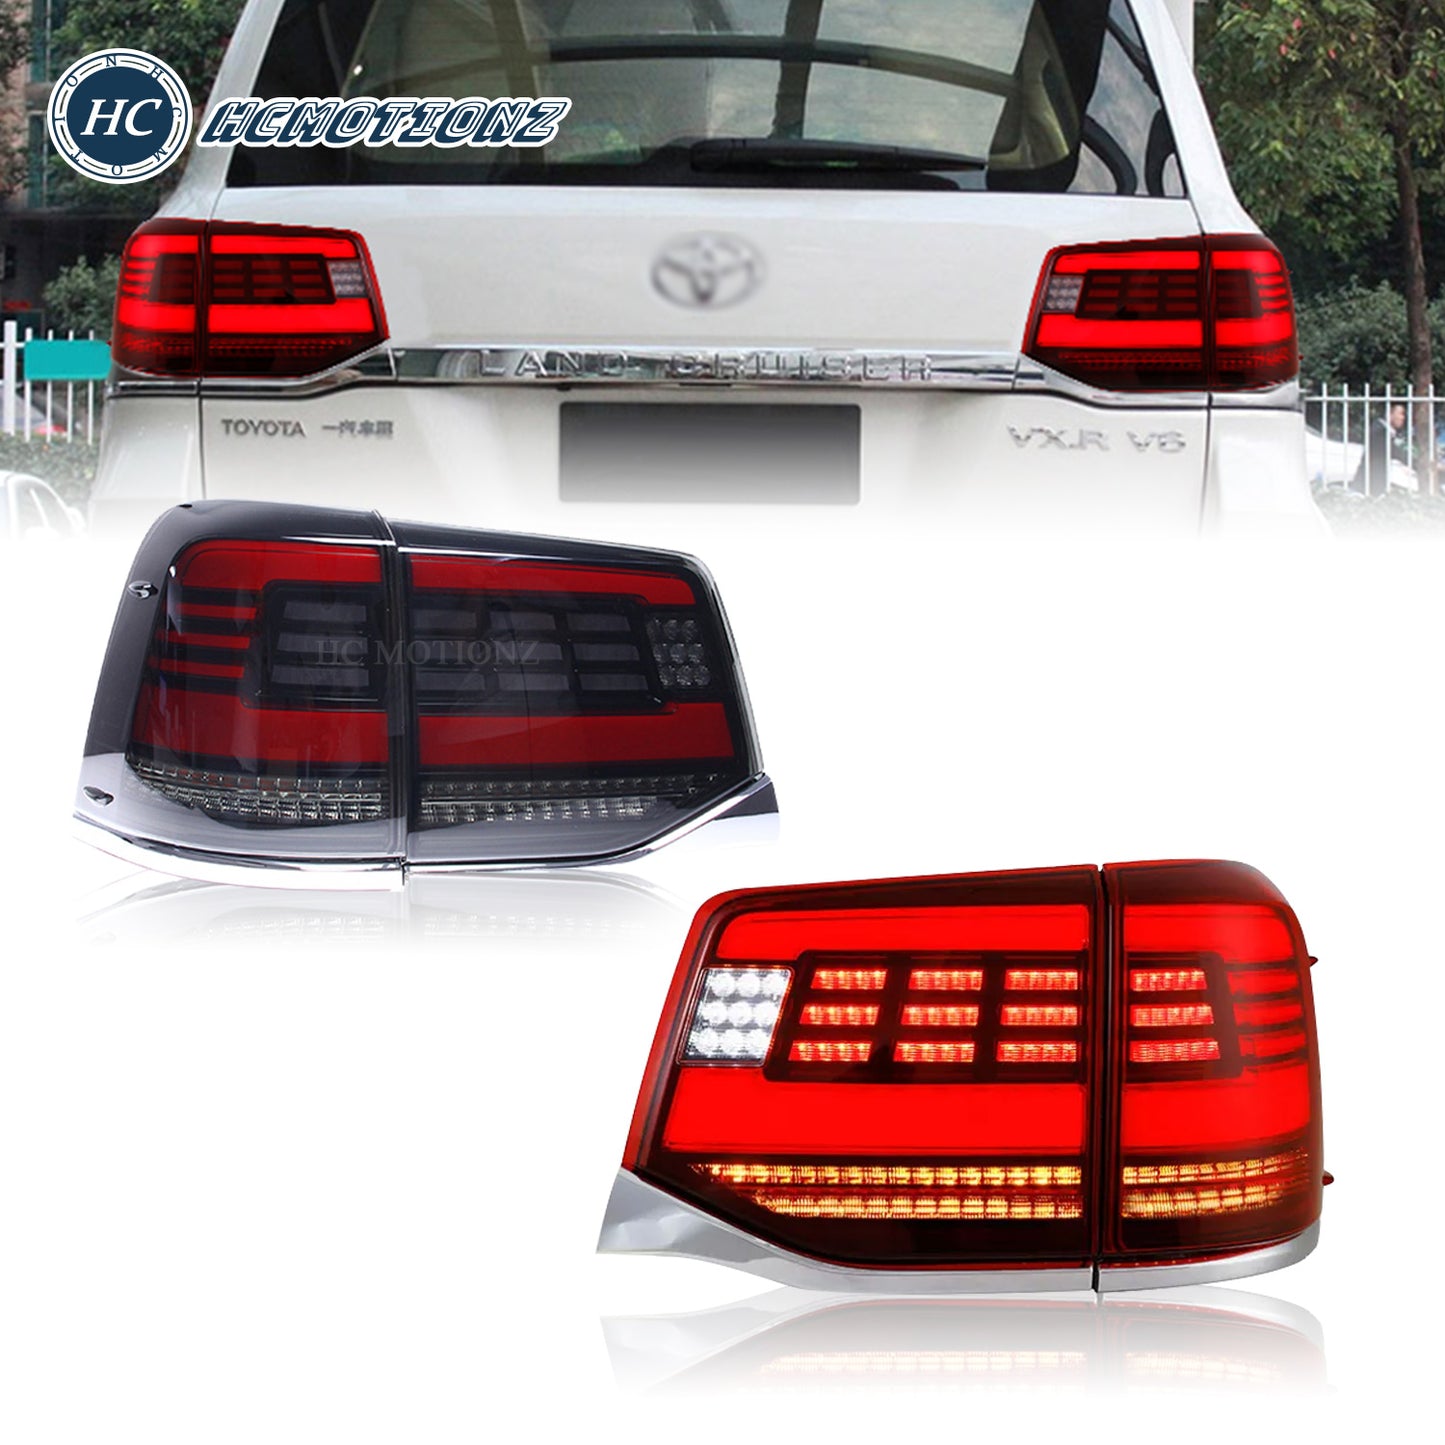 HCMOTION LED Tail lights For Toyota Land Cruiser 2016-2020